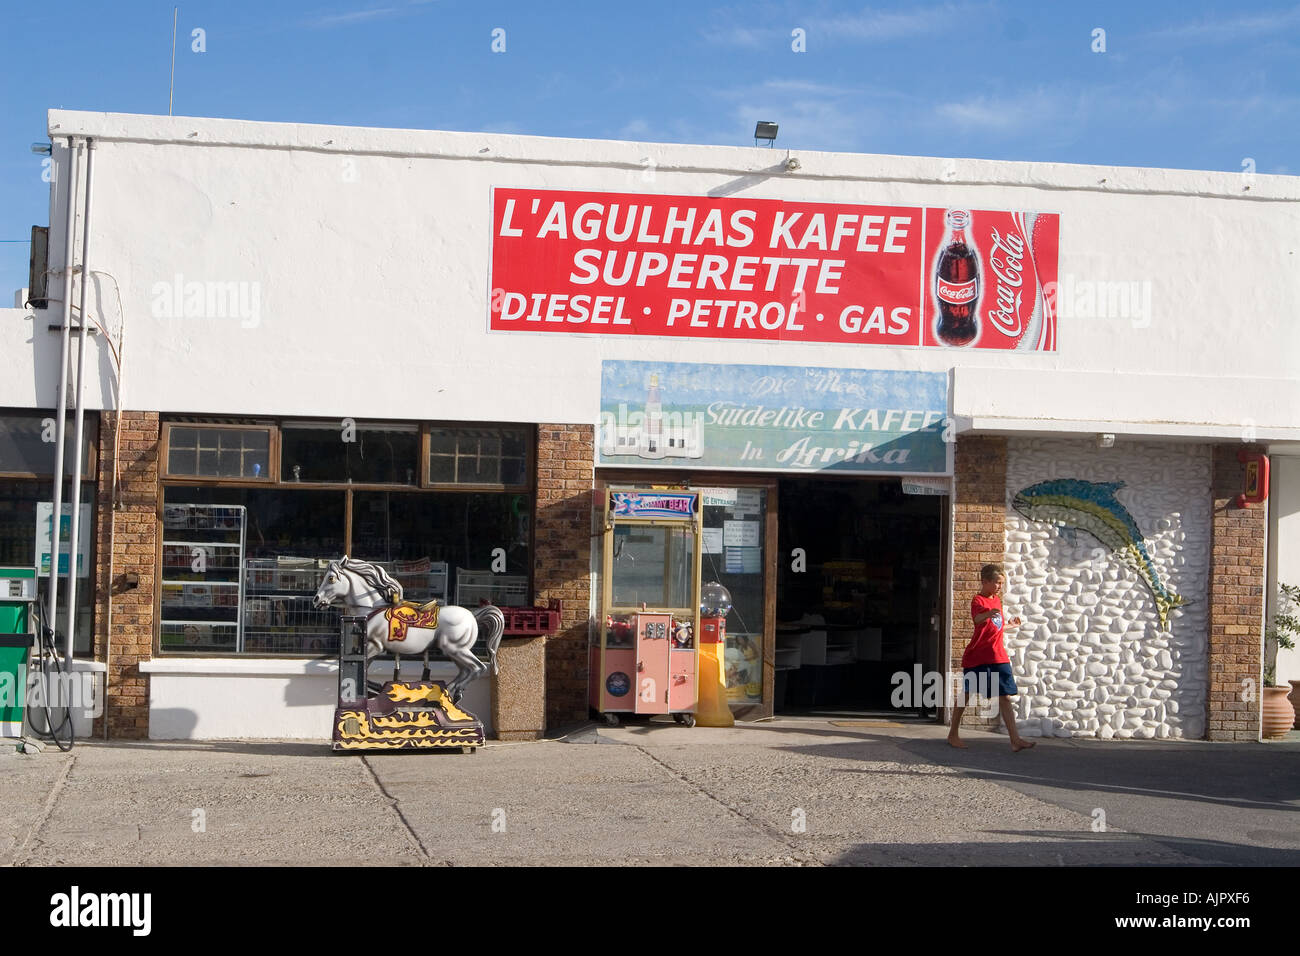 south africa cape agulhas southermost Kafee of africa petrol station Stock Photo